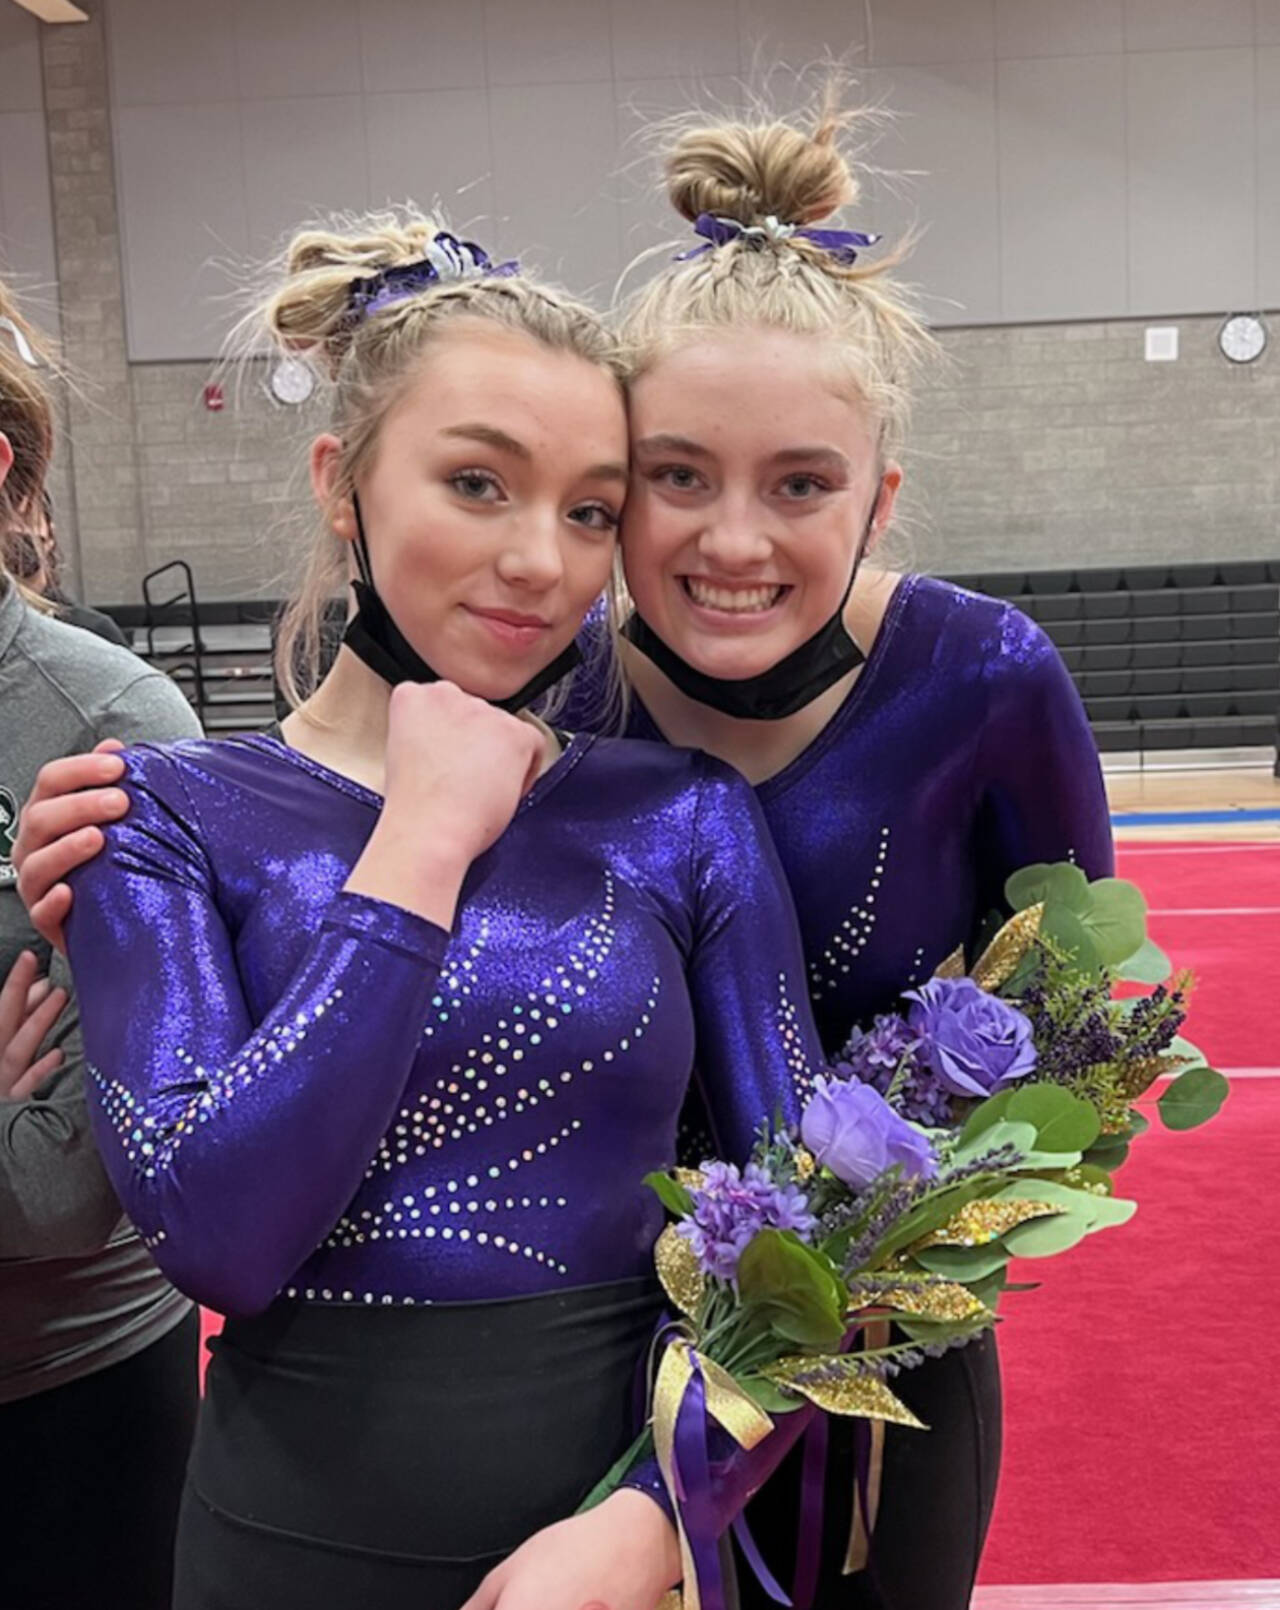 Sequim’s Susannah Sharp, left, and Alex Schmadeke right, competed at the Washington 2A/3A gymnastics meet this weekend. Schmadeke finished 10th overall in the state and fifth in the floor. (Courtesy photo)